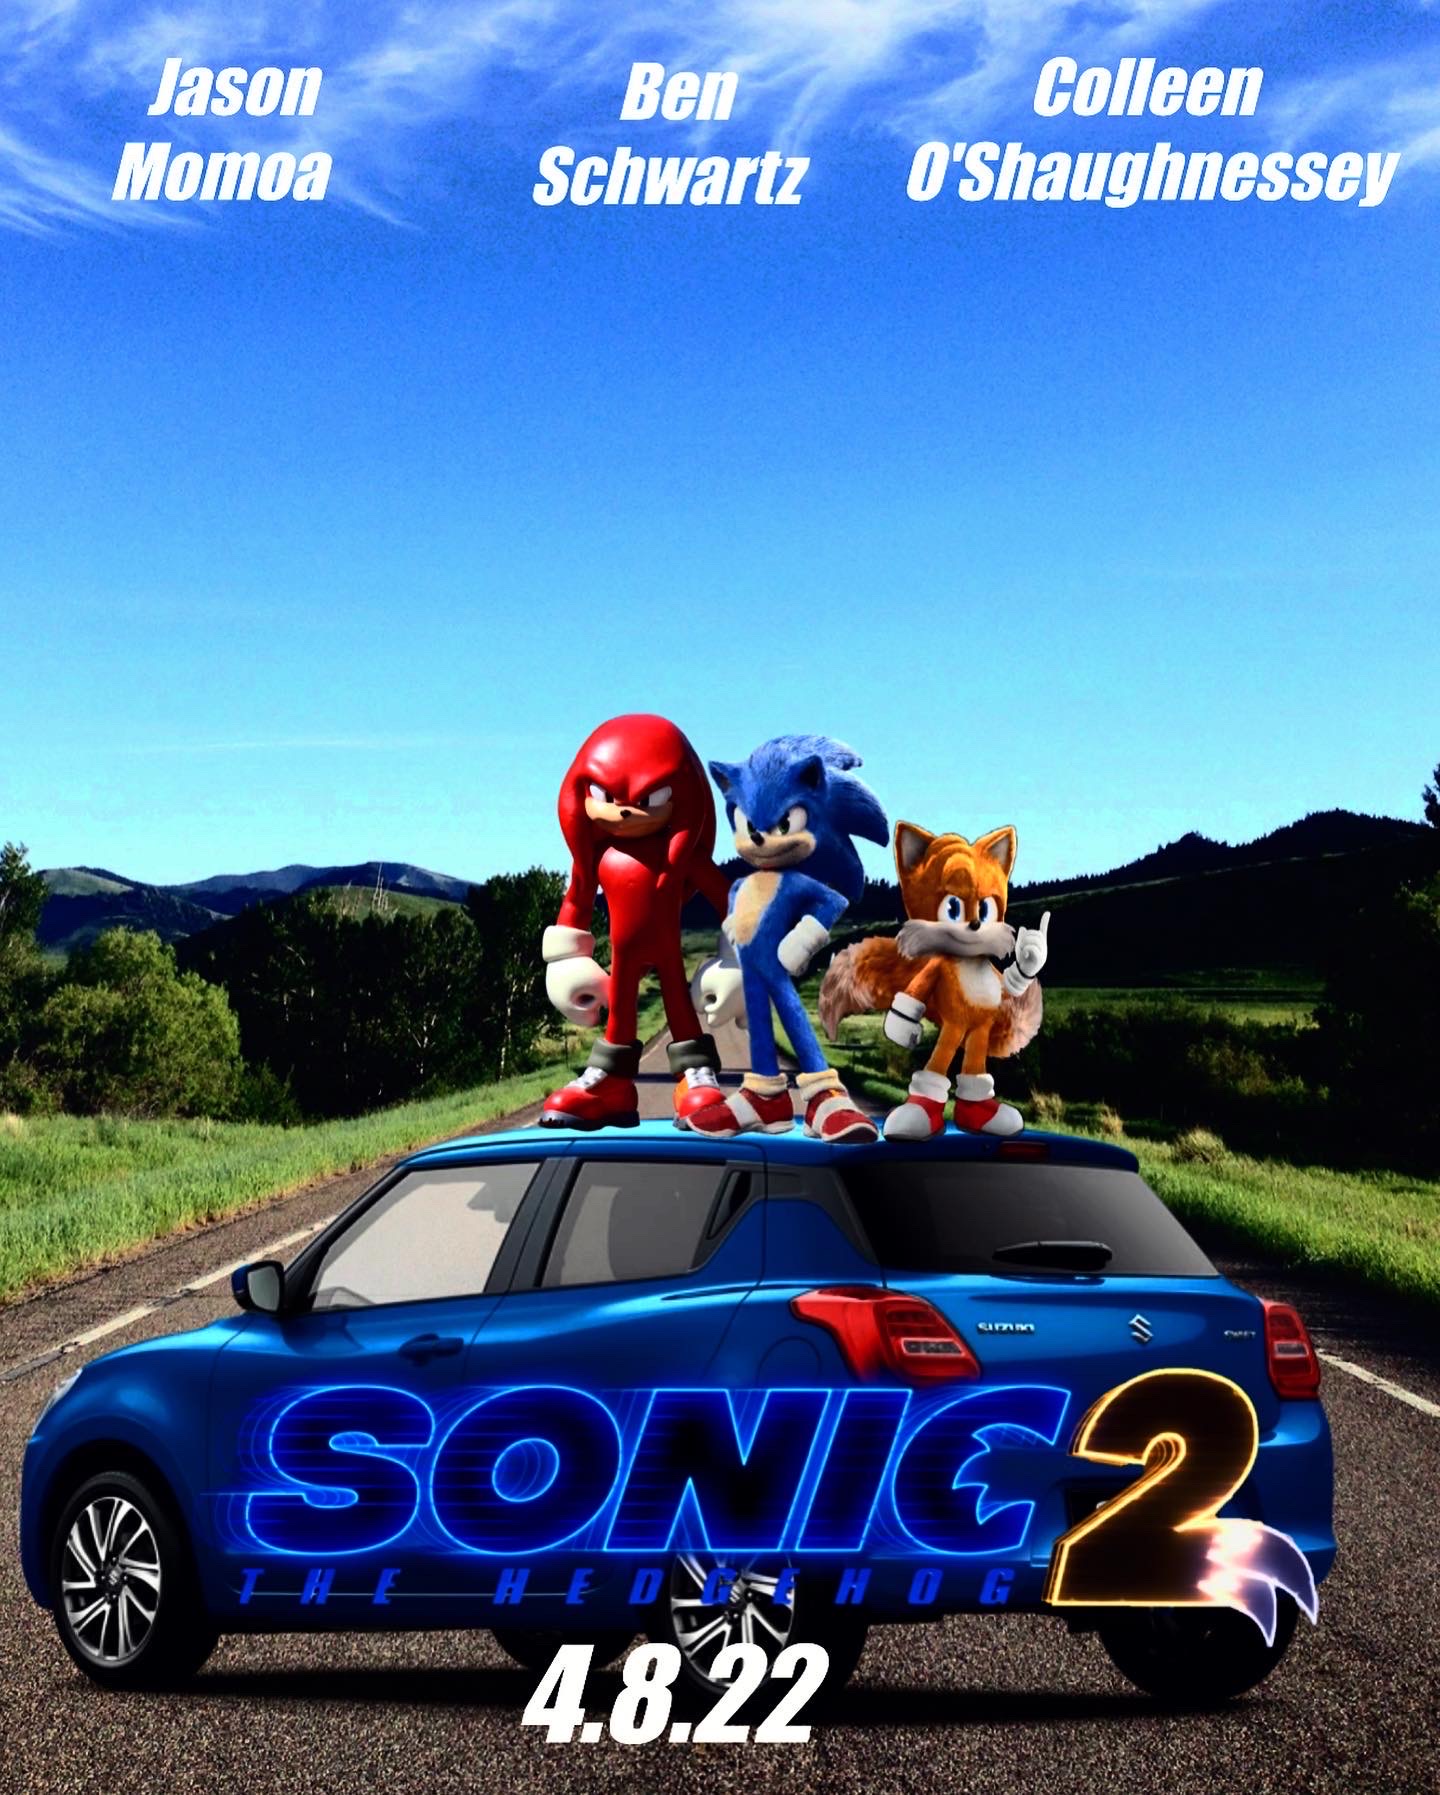 I actually prefer this fan-made Sonic 2 poster to the official design